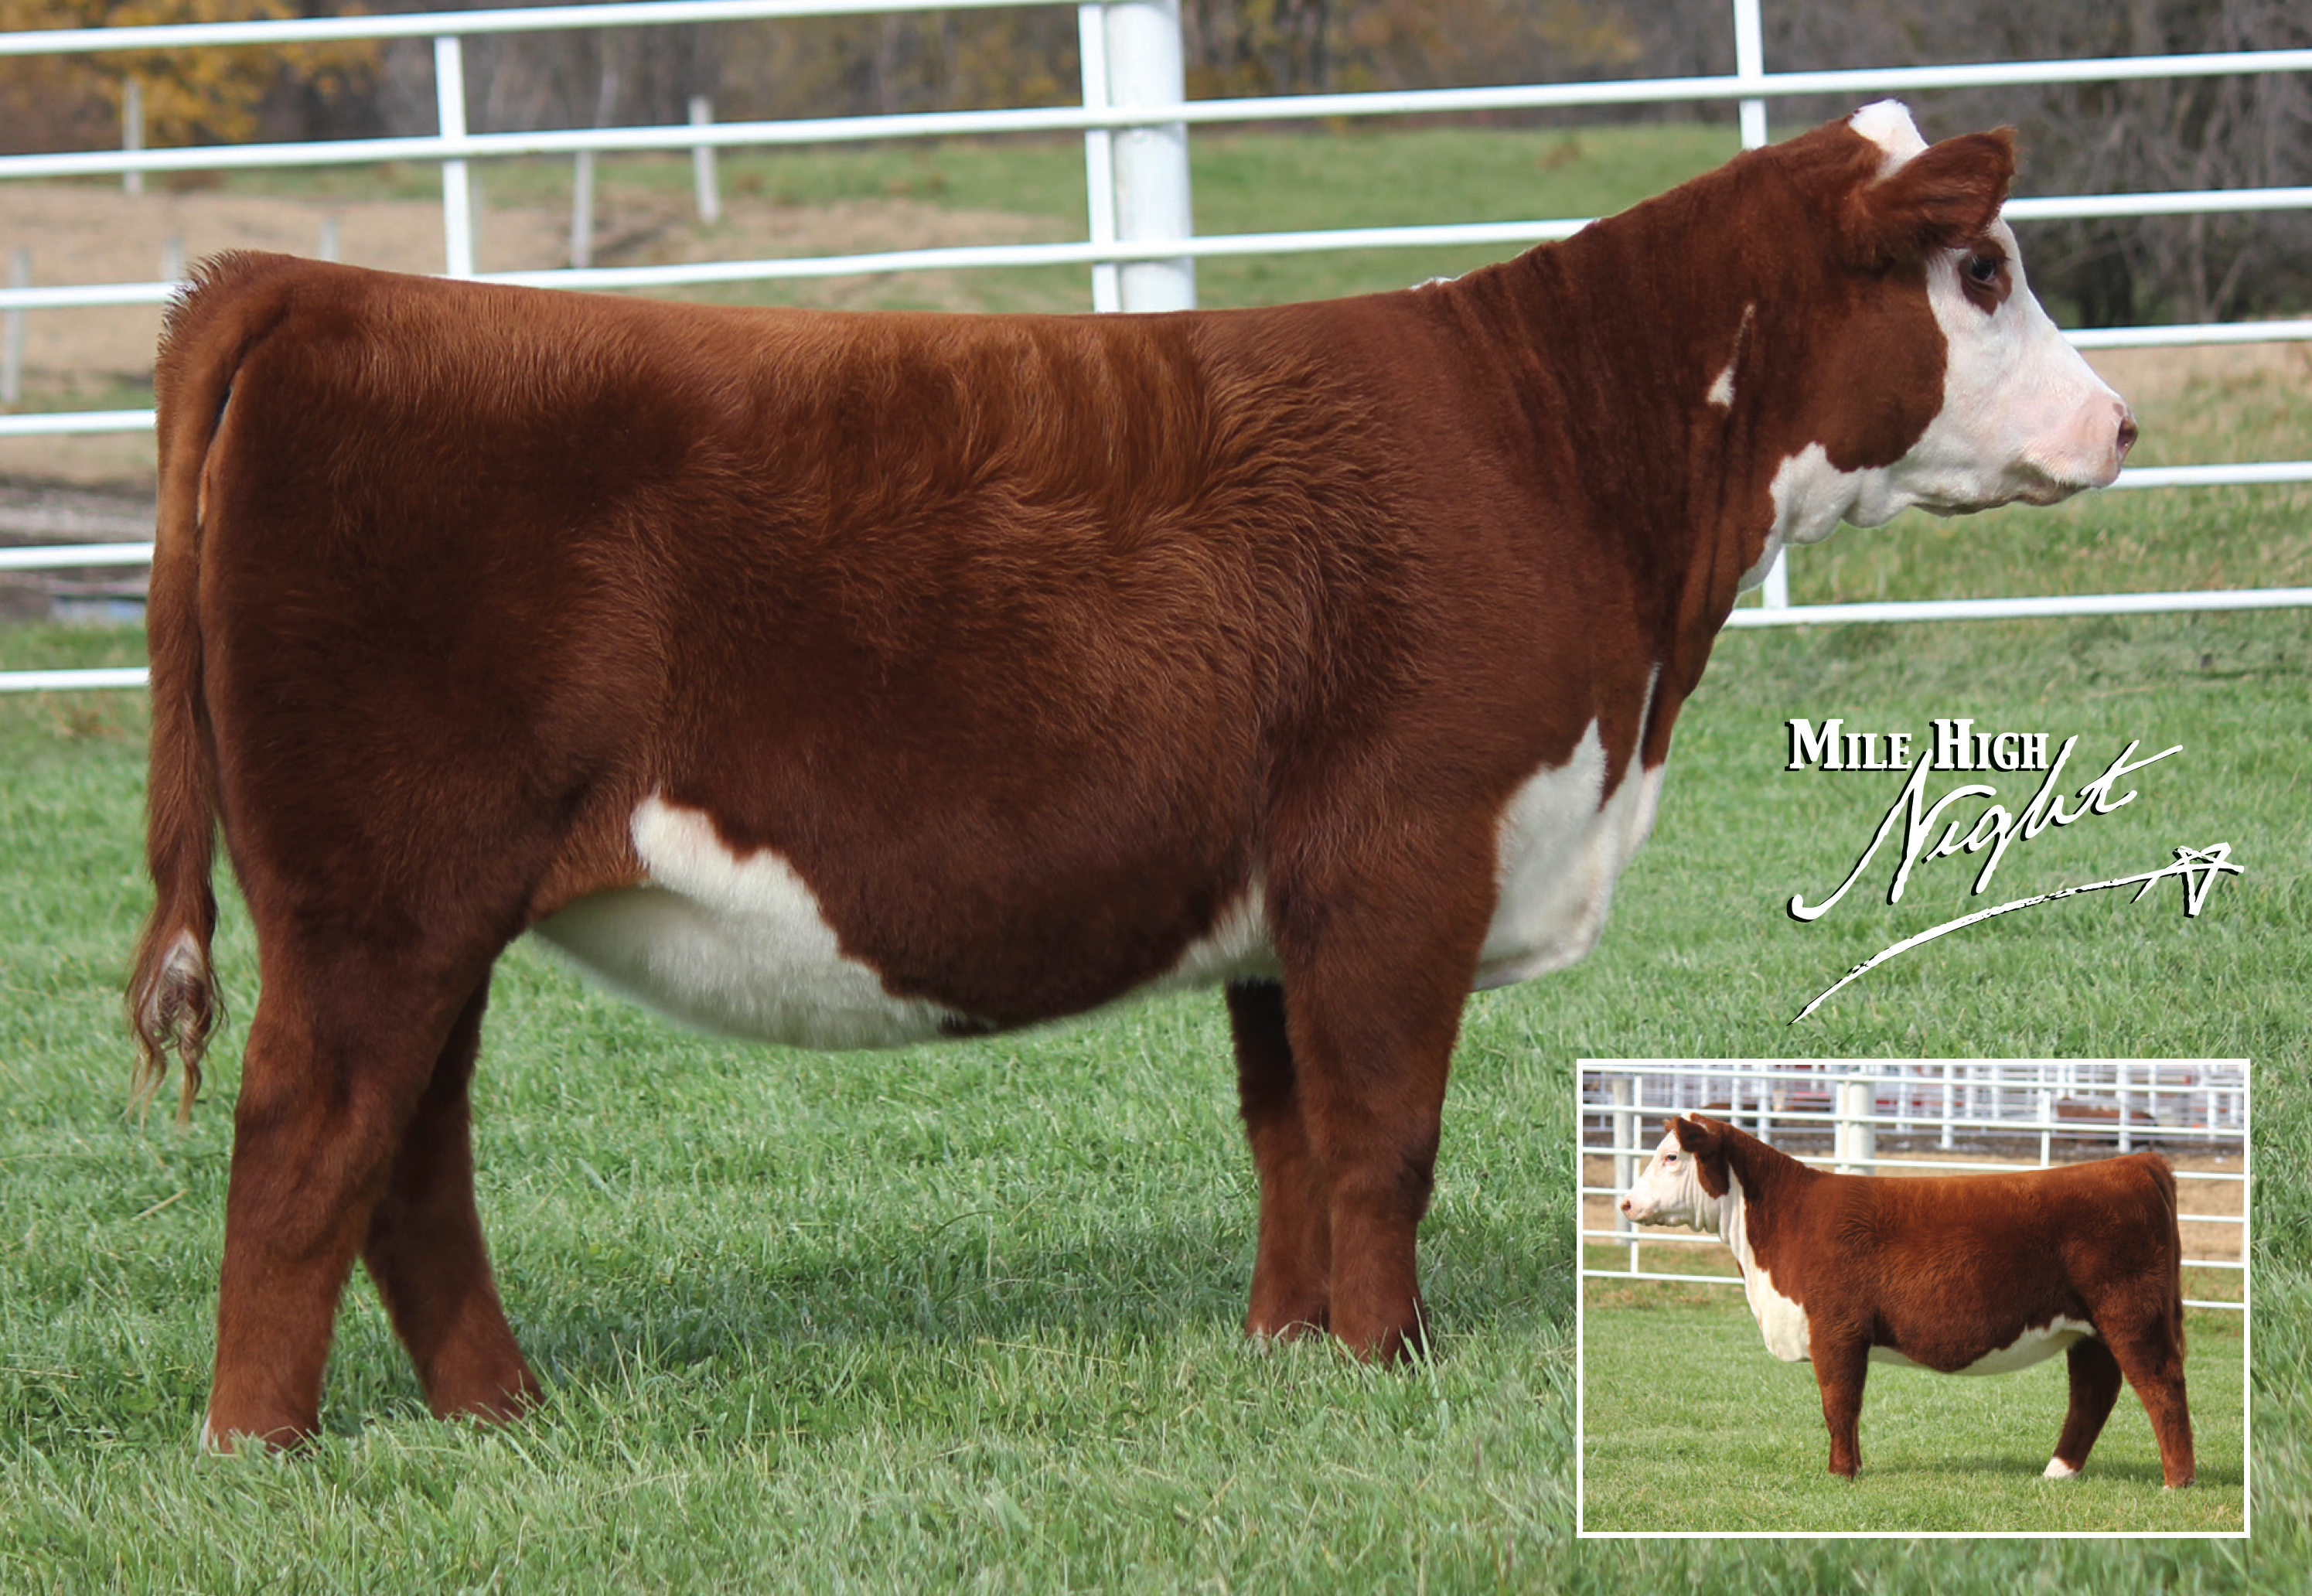 Queen of the Hill – Foundation Female will highlight the 2019 Mile High Night National Hereford Sale